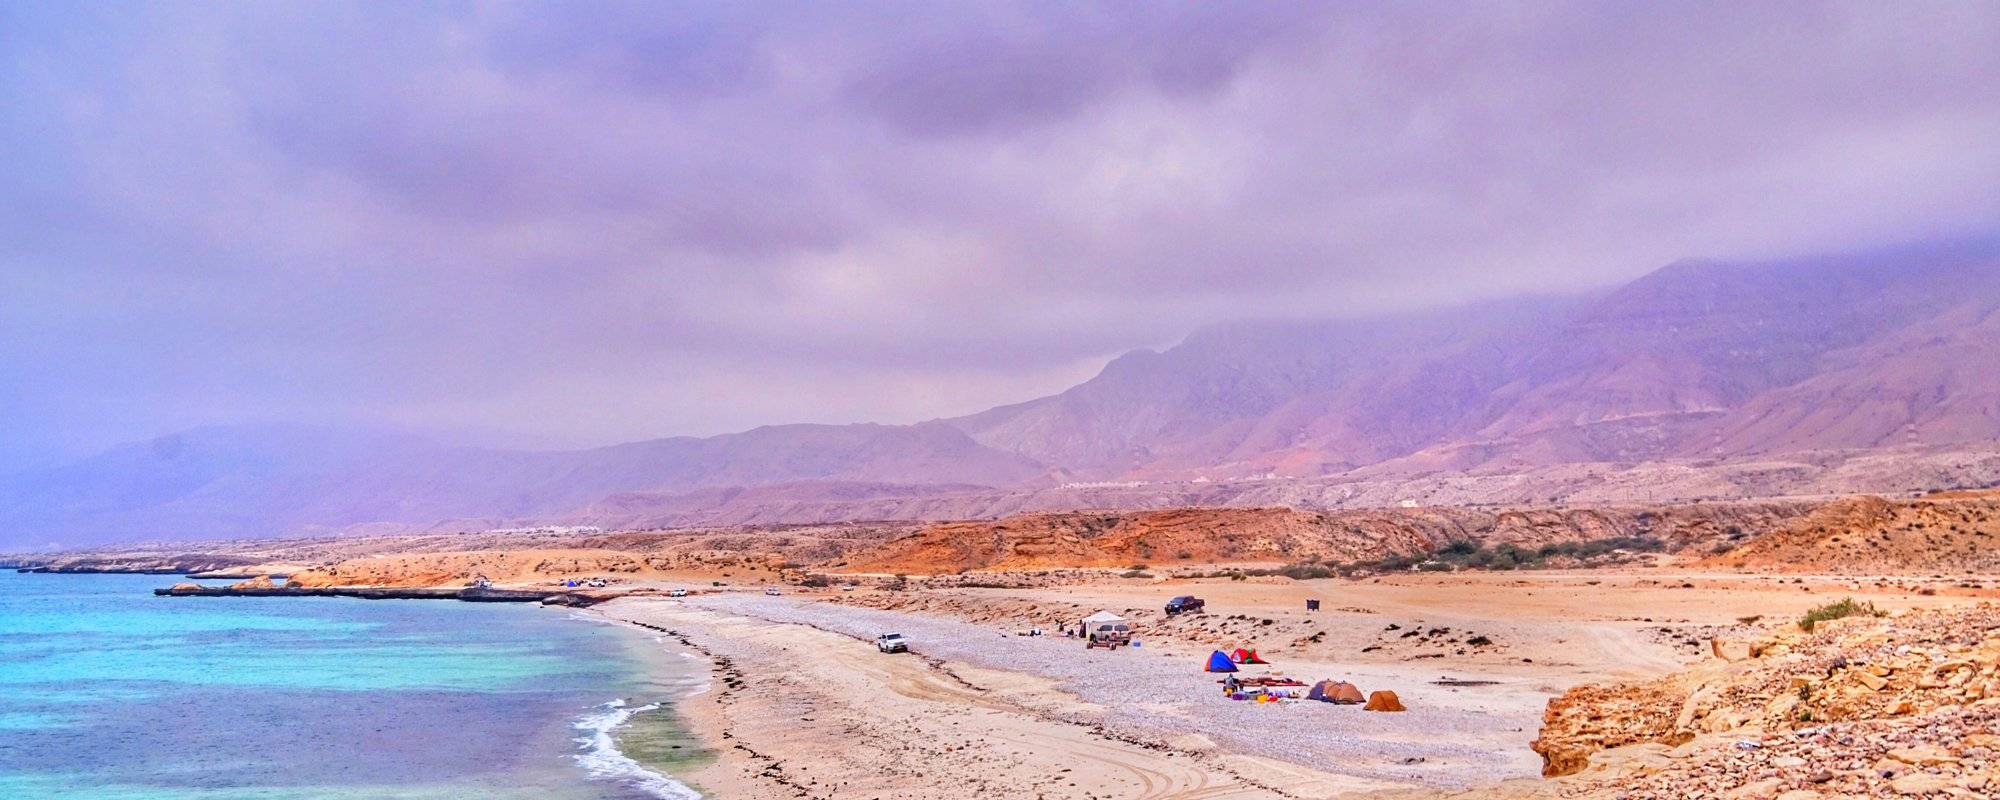 Travel Blog 40: En-route To The Breathtaking City of Oman